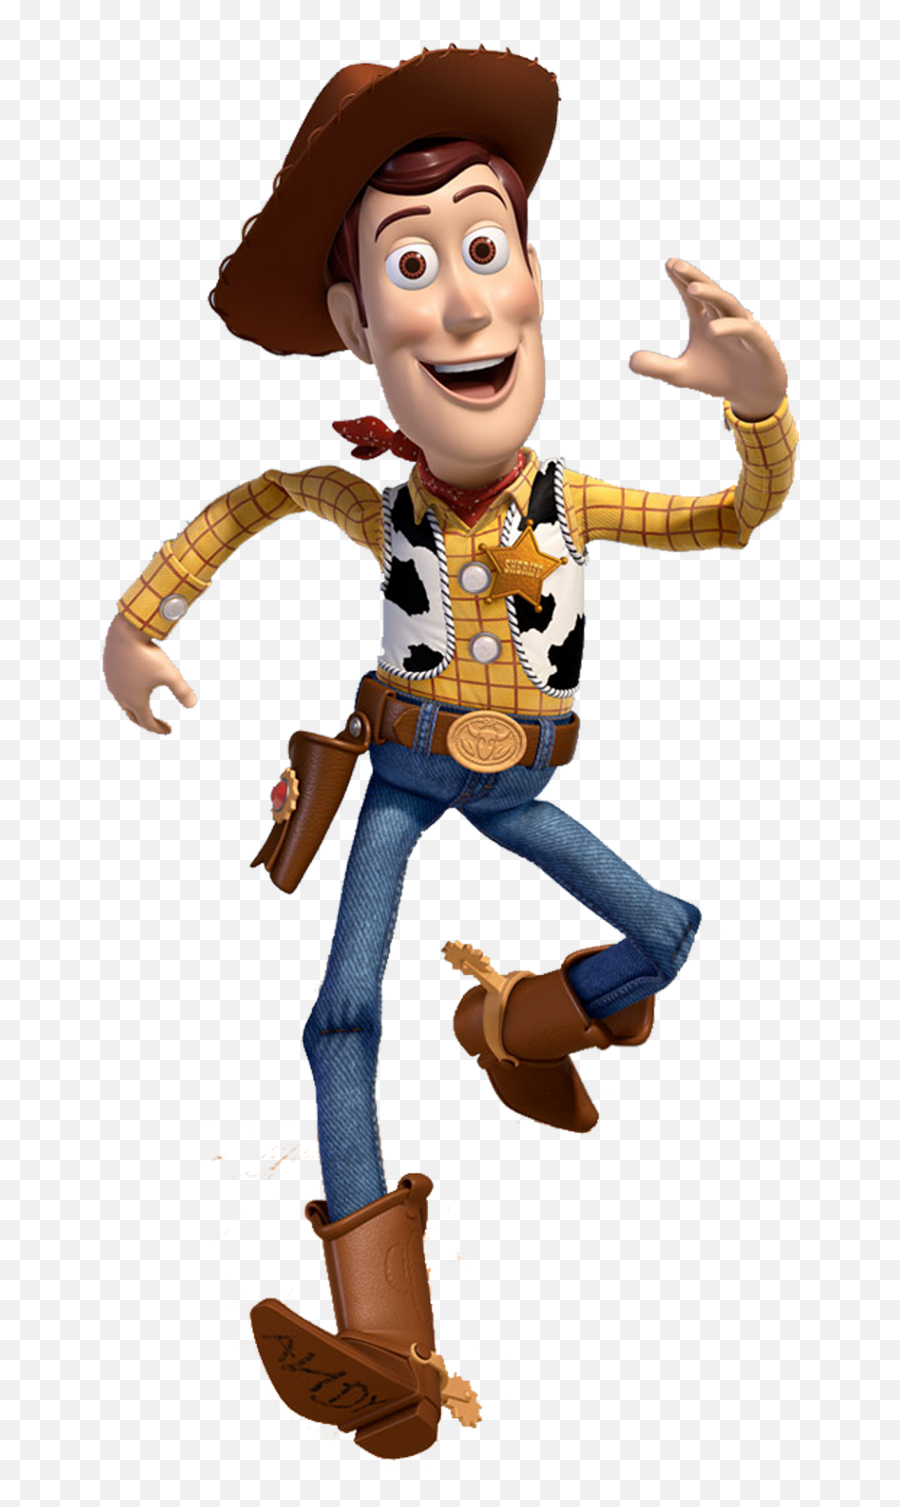 Long For Sequels Of Pixar Movies - Toy Story Woody Emoji,New Pixar Movie About Emotions